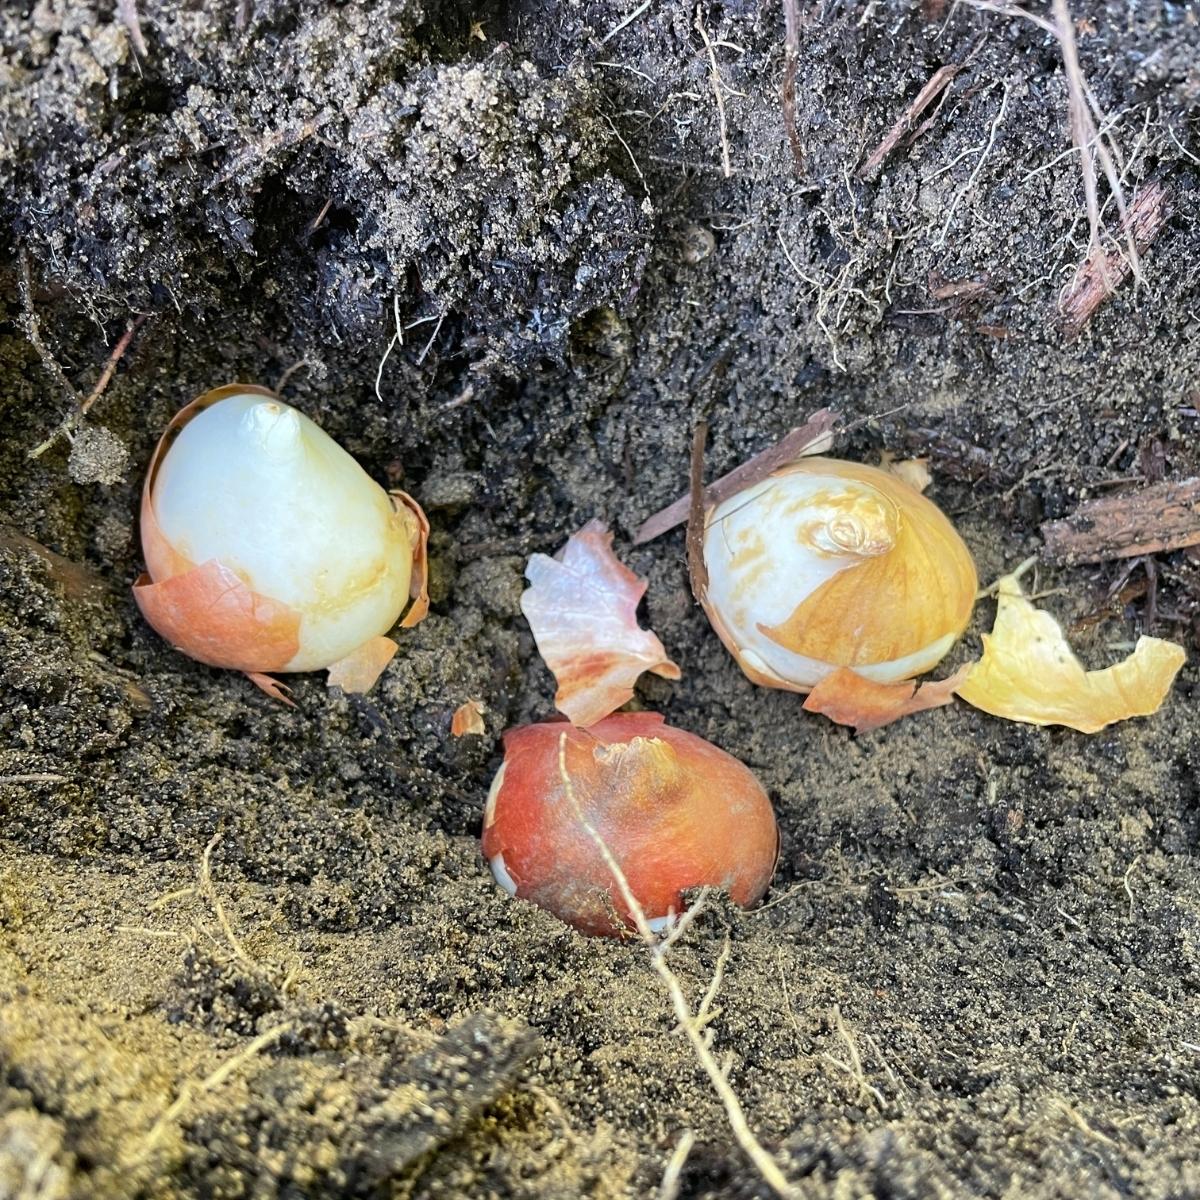 tulip bulbs planted in a hole with the pointed end up